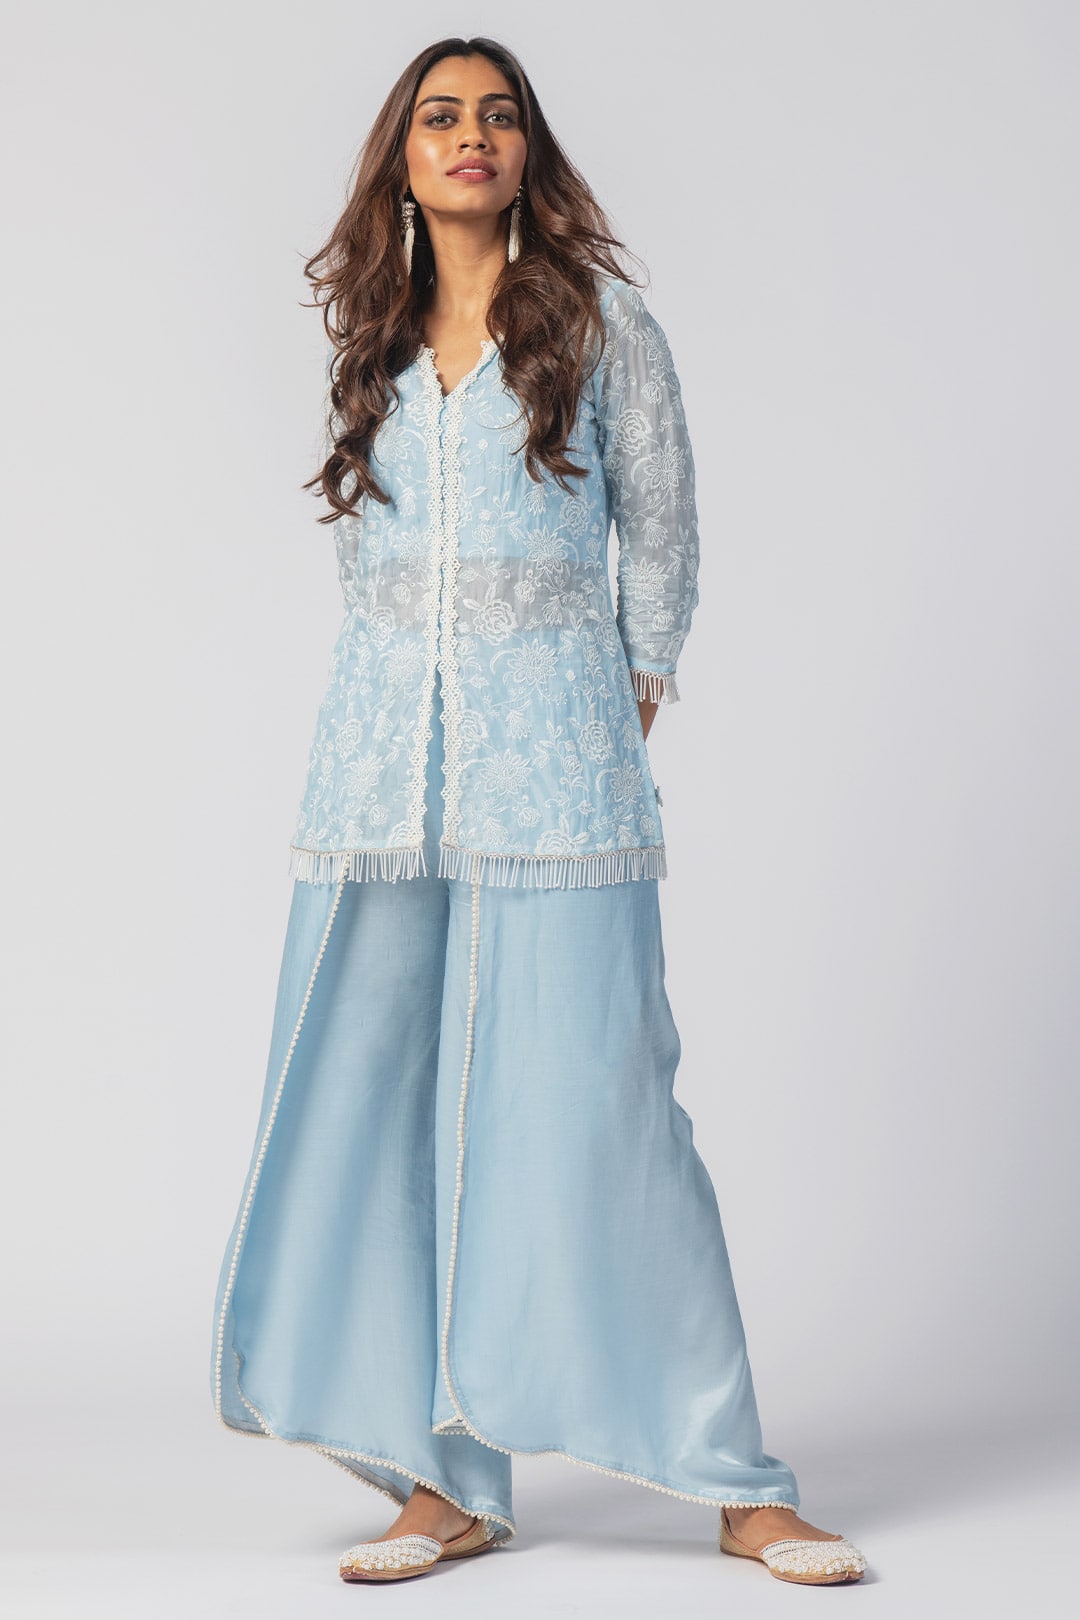 Mulmul Tencel Luxe Organza Claire Blue Kurta With Cupro Claire Dhoti Blue Pant